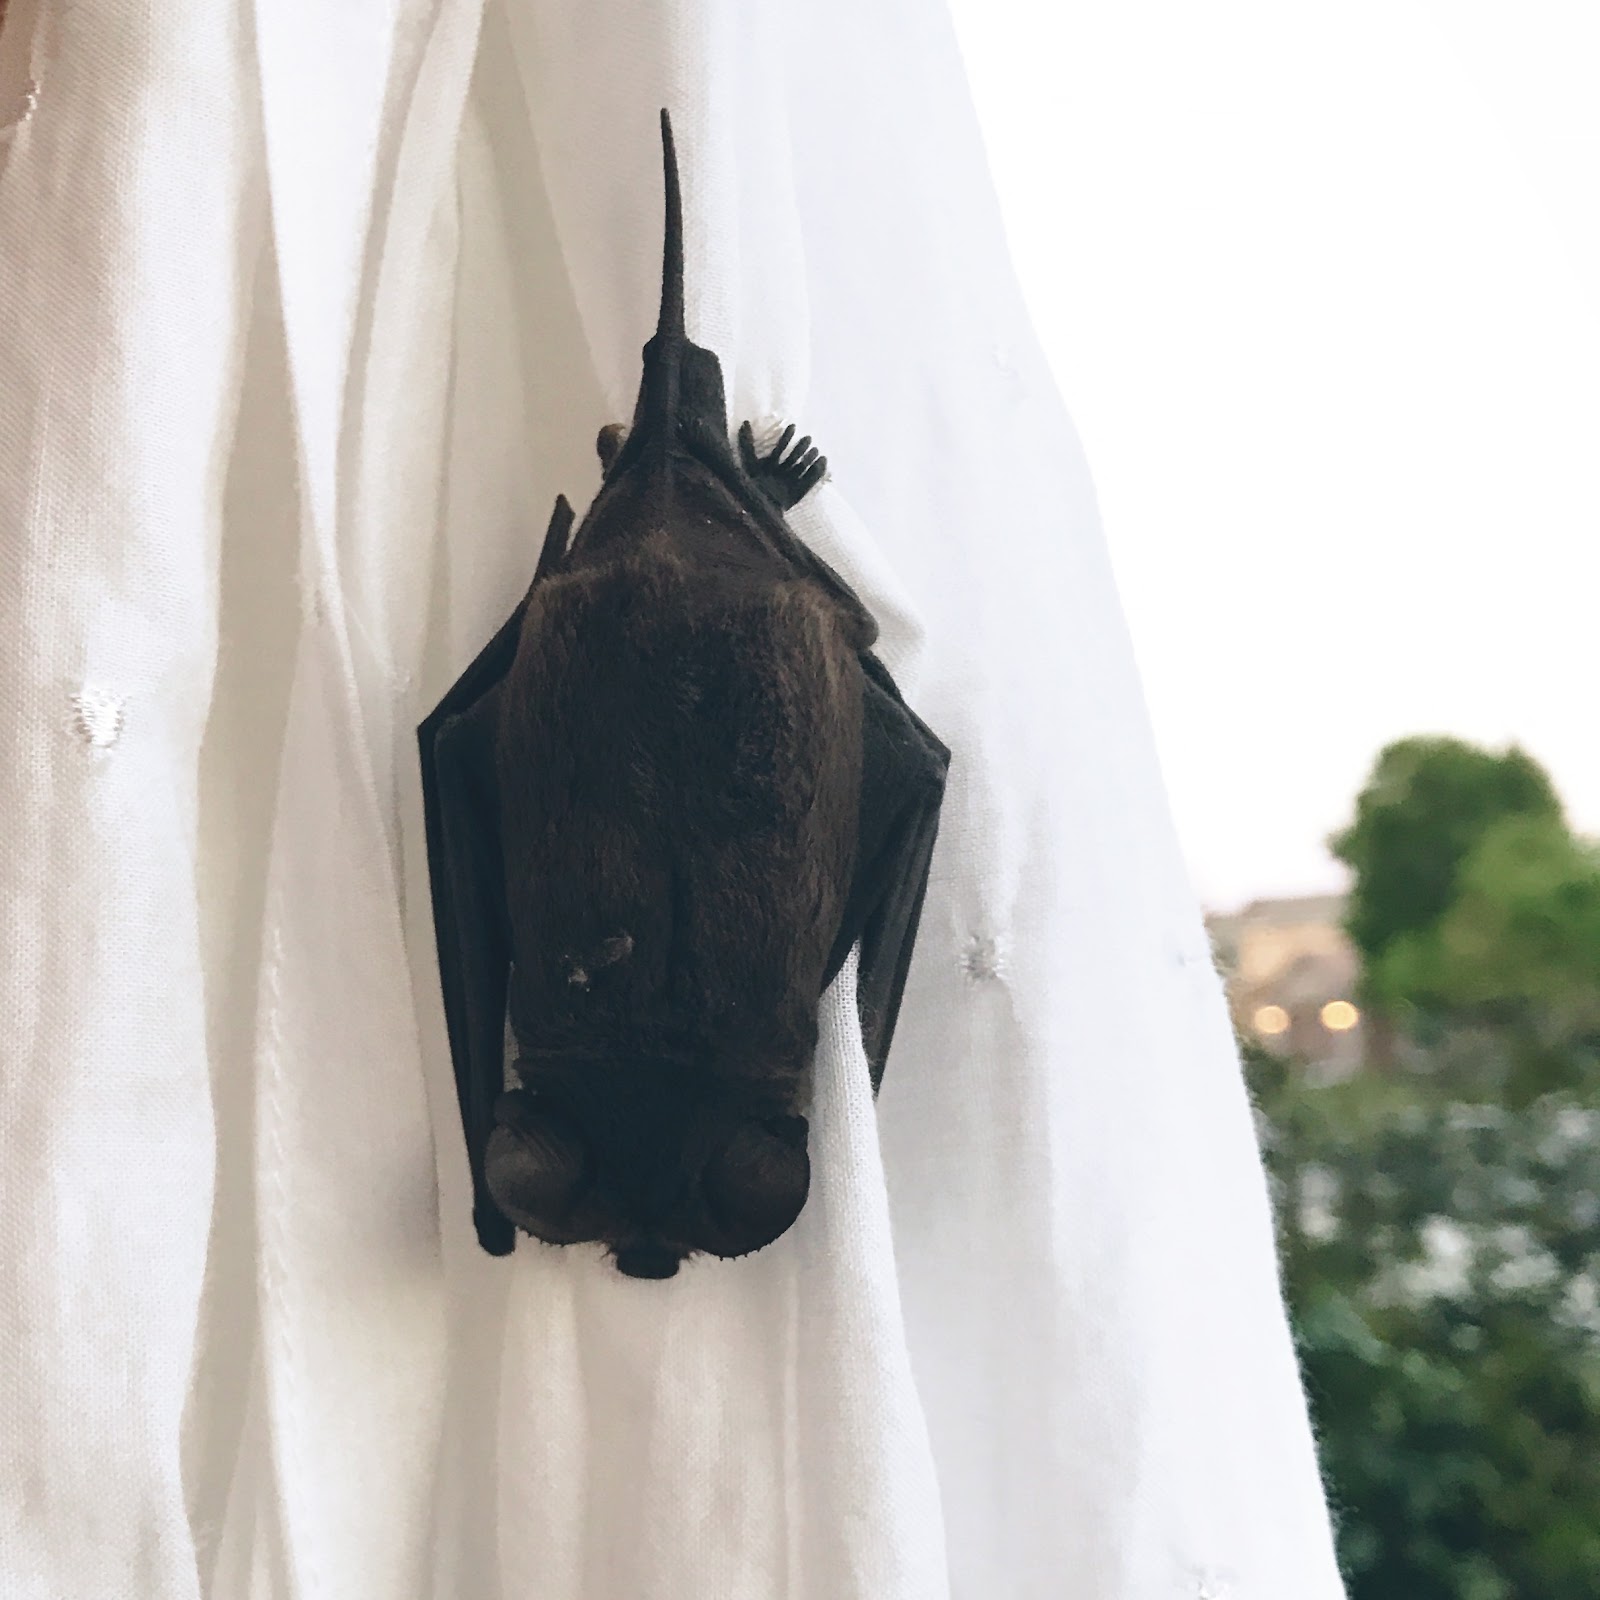 I Don't Know About You, But I Prefer My Salad Without Dead Bats | Ravishly